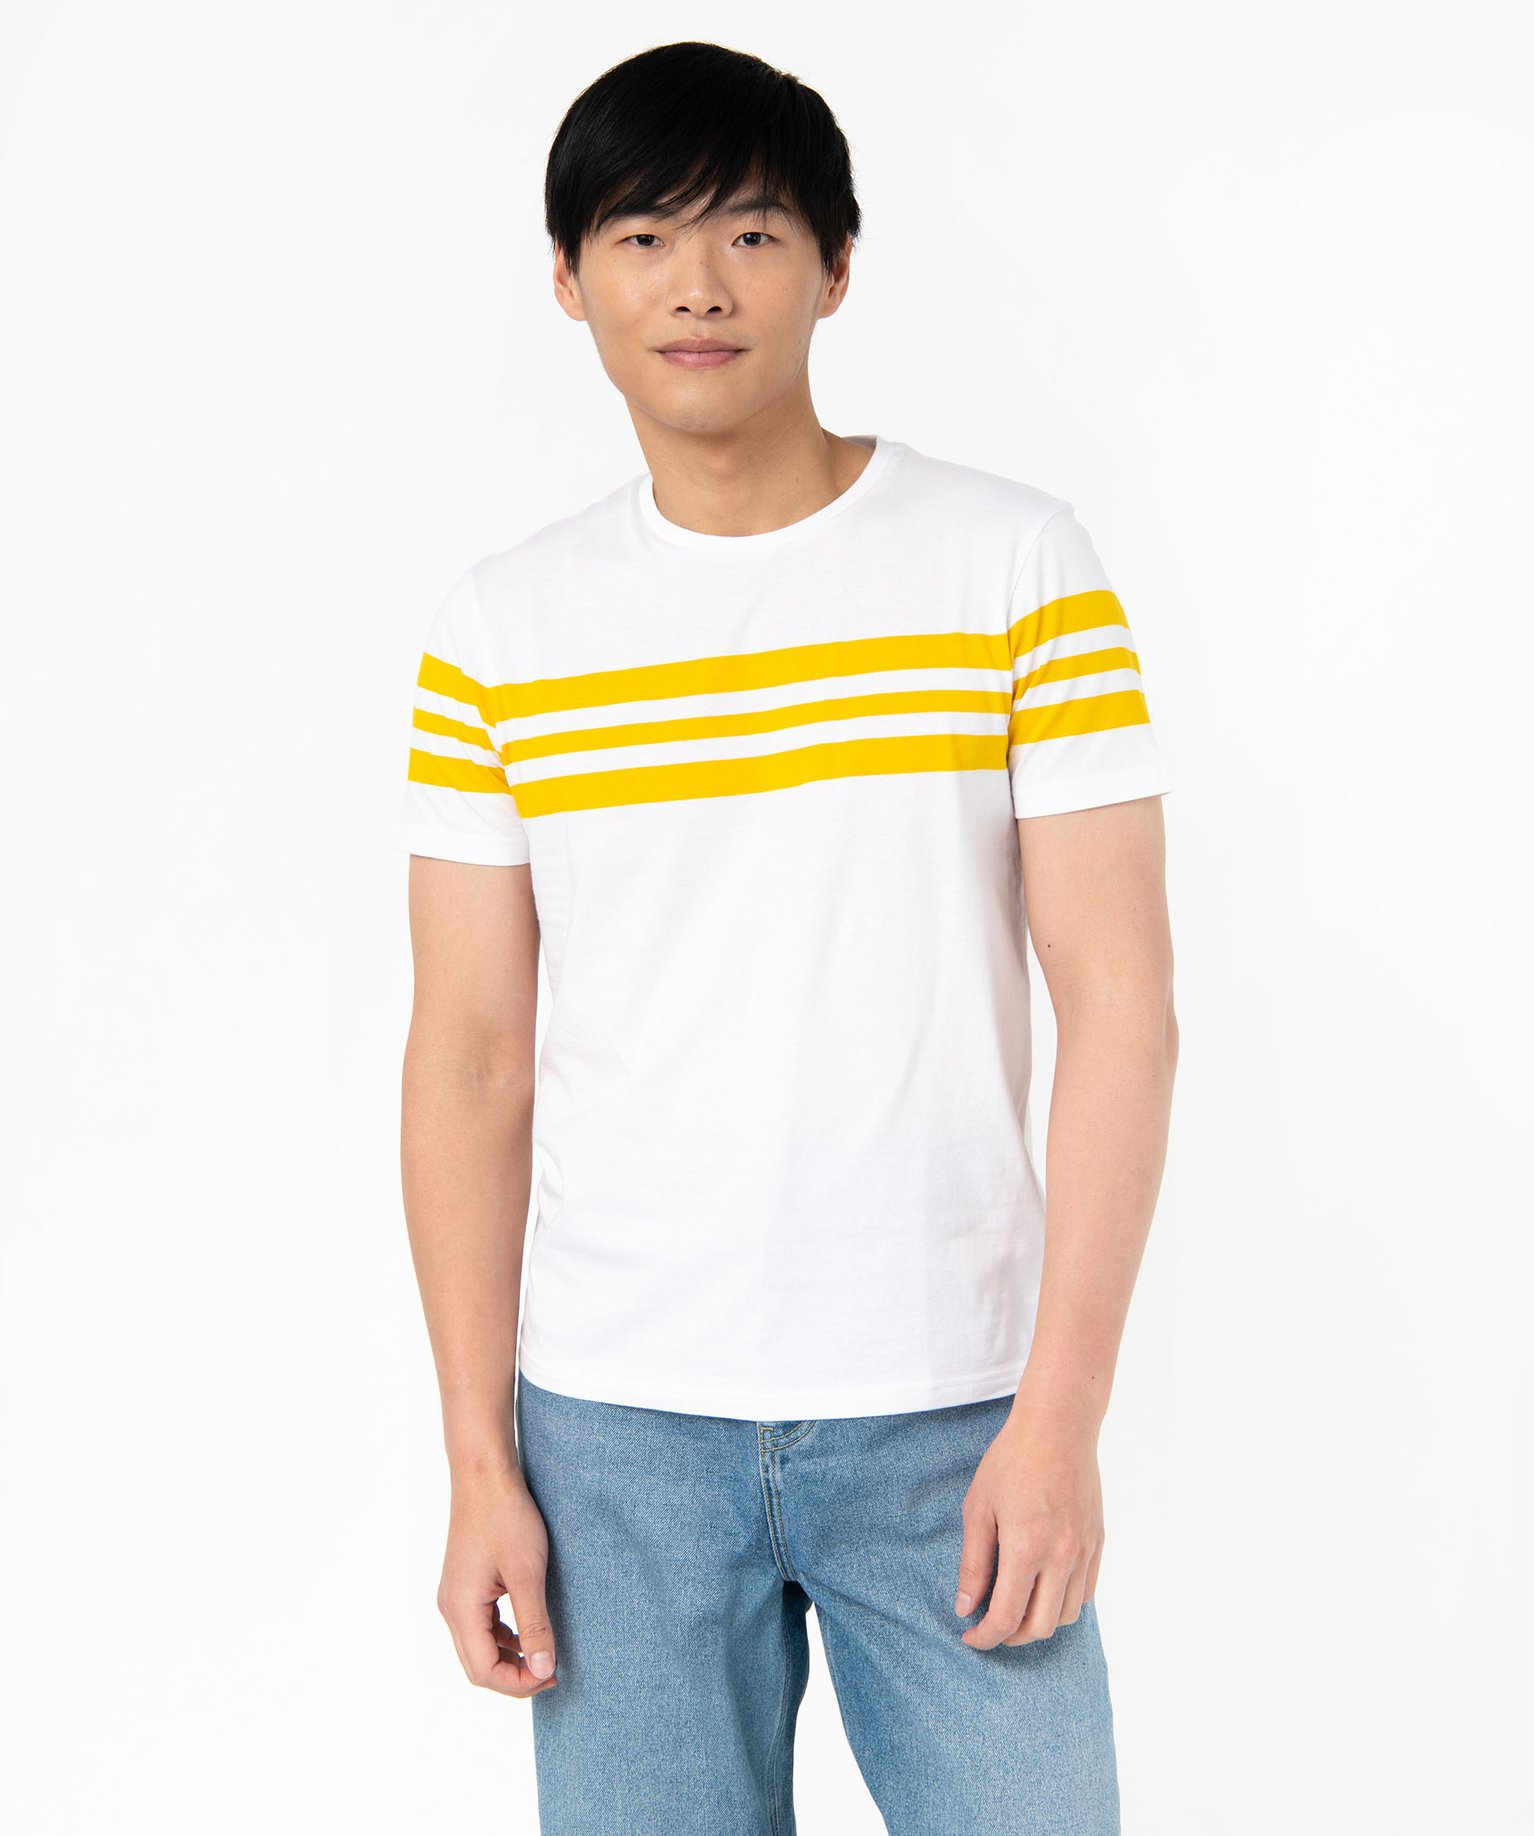 tee-shirt homme raye a manches courtes jaune tee-shirts